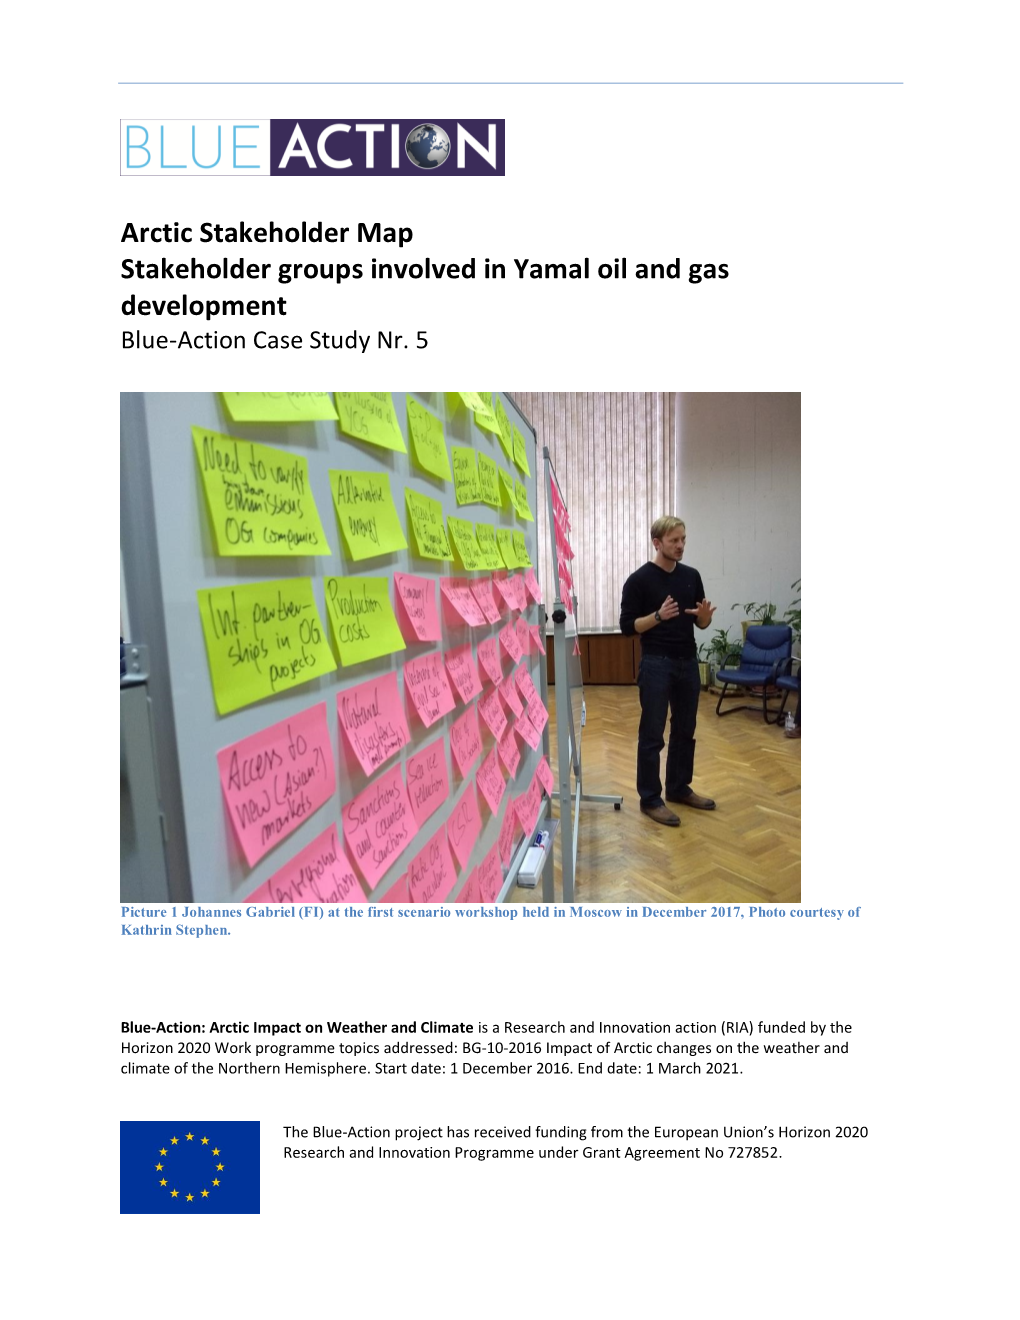 Arctic Stakeholder Map Stakeholder Groups Involved in Yamal Oil and Gas Development Blue-Action Case Study Nr